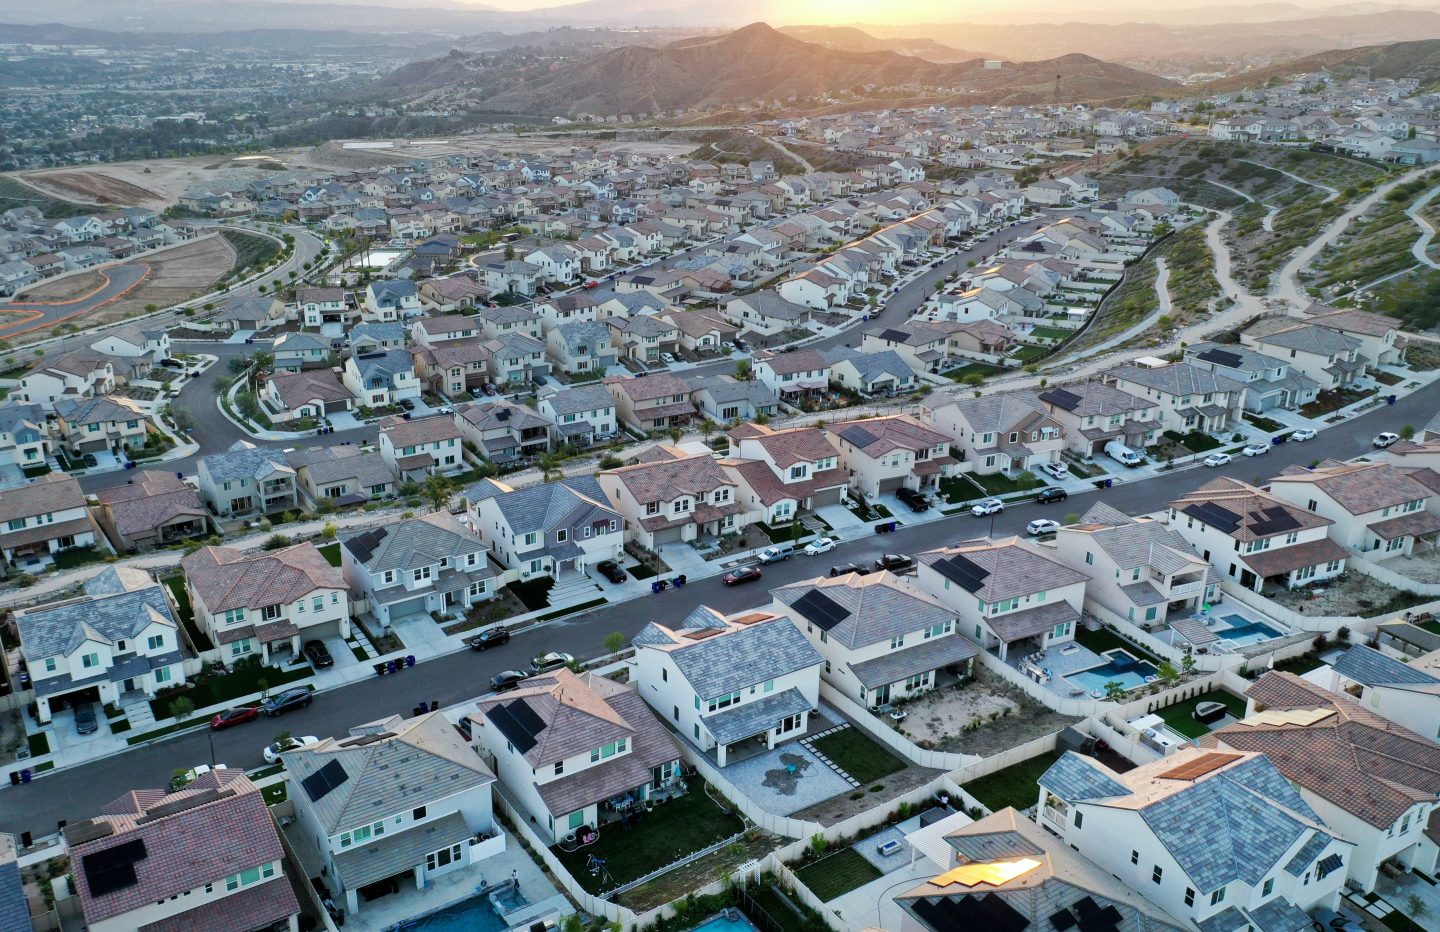 SANTA CLARITA, CALIFORNIA &#8211; SEPTEMBER 08: An aerial view of homes in a housing development with the sun reflecting off solar panels (BOTTOM R) on September 08, 2023 in Santa Clarita, California. According to the National Association of Realtors, the median existing-home sale price in the U.S. increased 1.9 percent in July following five straight months of declines, which was the longest stretch of declines in 11 years, amid high interest rates. (Photo by Mario Tama/Getty Images)